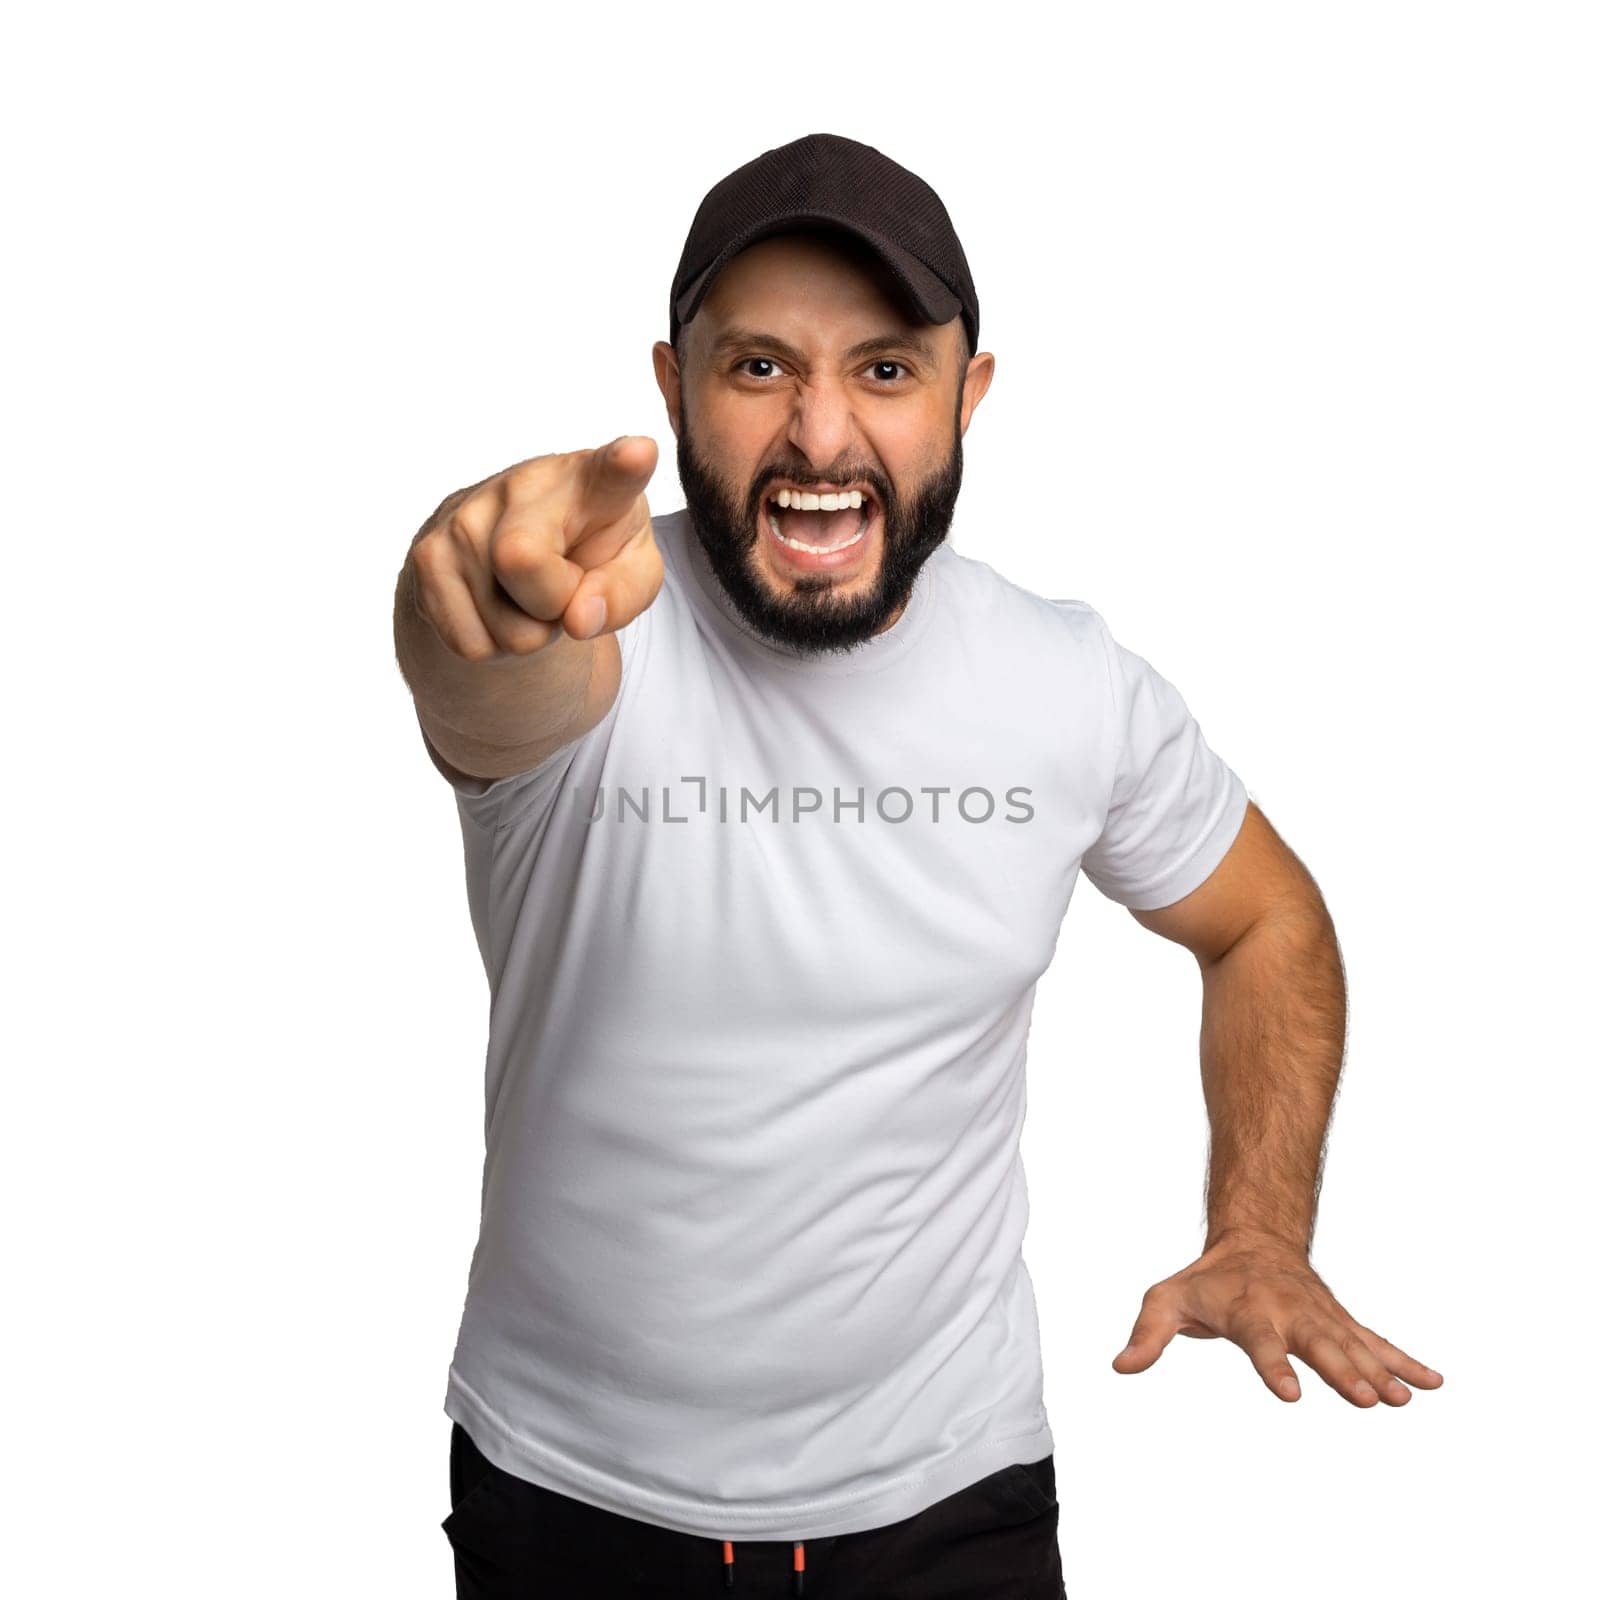 Portrait of peevish bearded guy with black hat, yells angrily at somebody, points with index finger directly at camera, dressed in white t shirt, blames you in doing wrong things. Indoor studio shot isolated on white background.